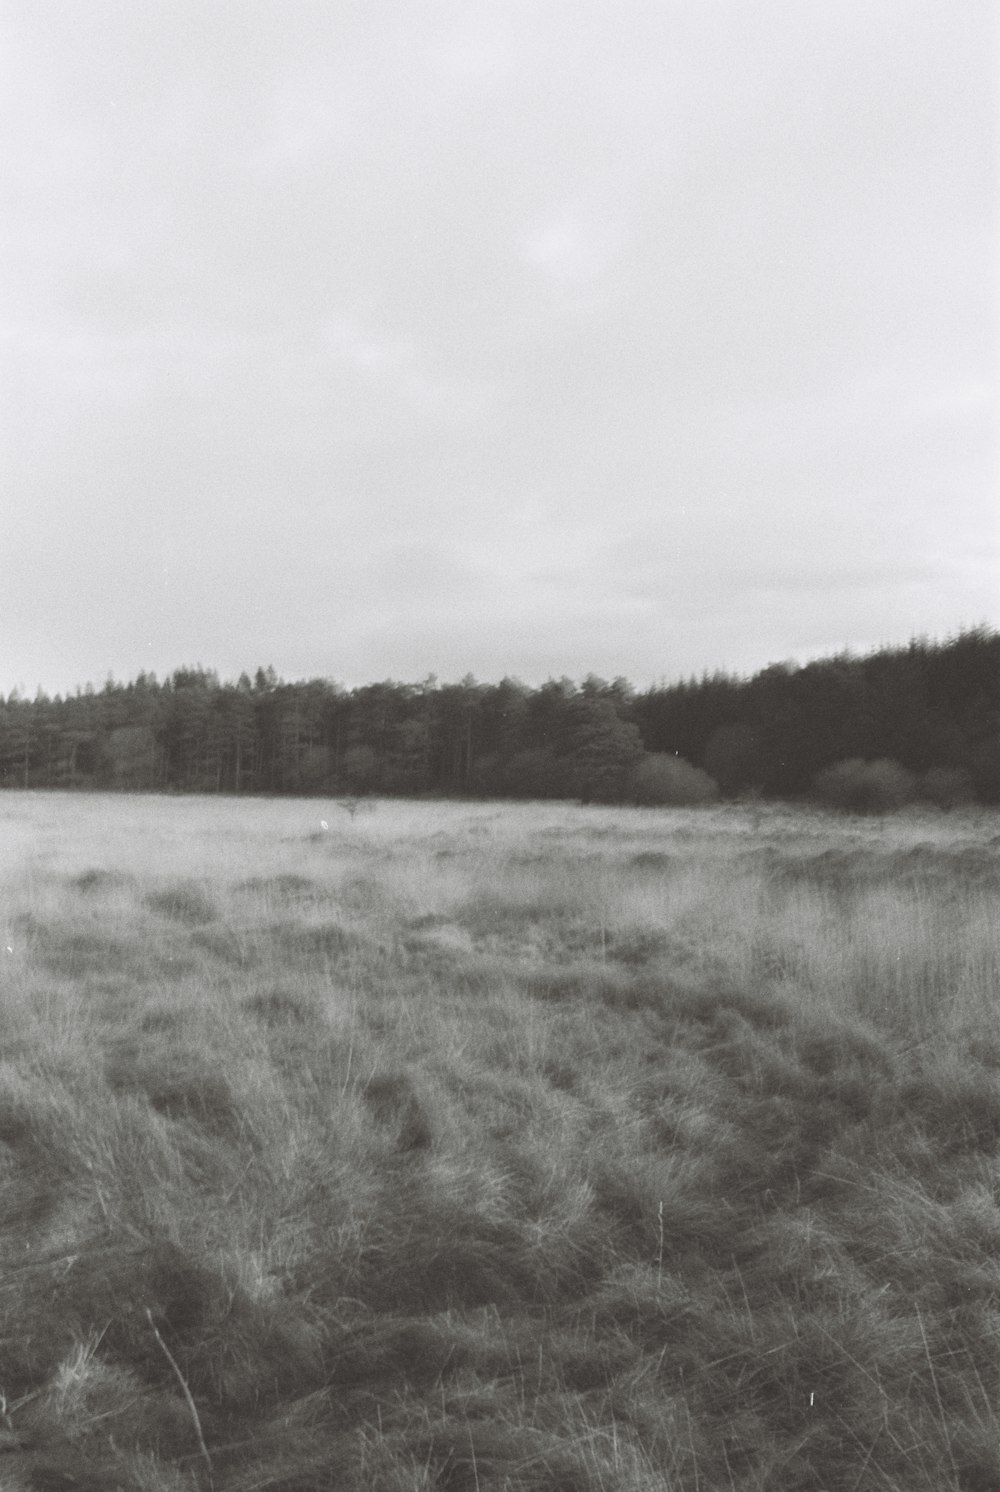 a black and white photo of a field with trees in the background